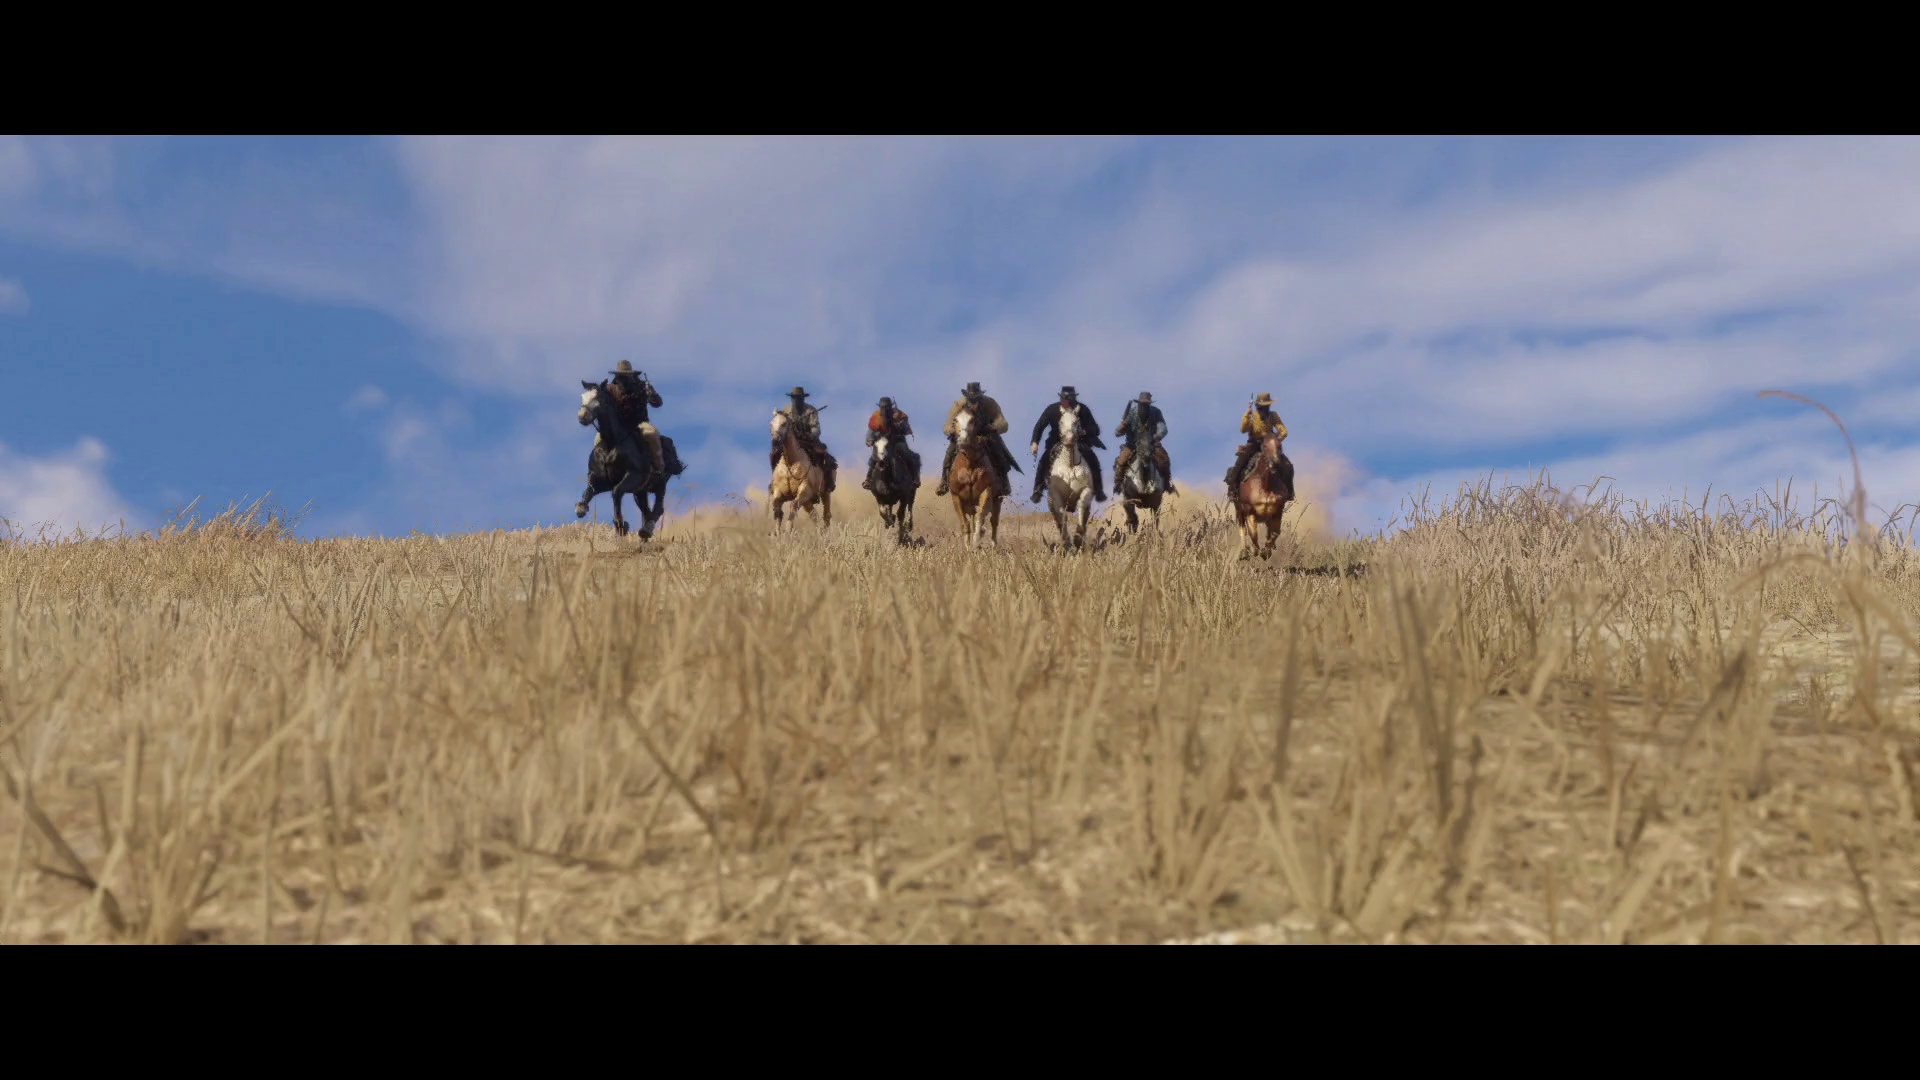 http://www.rdrvision.com/images/content/red-dead-redemption-2/trailer_1/red-dead-redemption-2_trailer-1_22.png